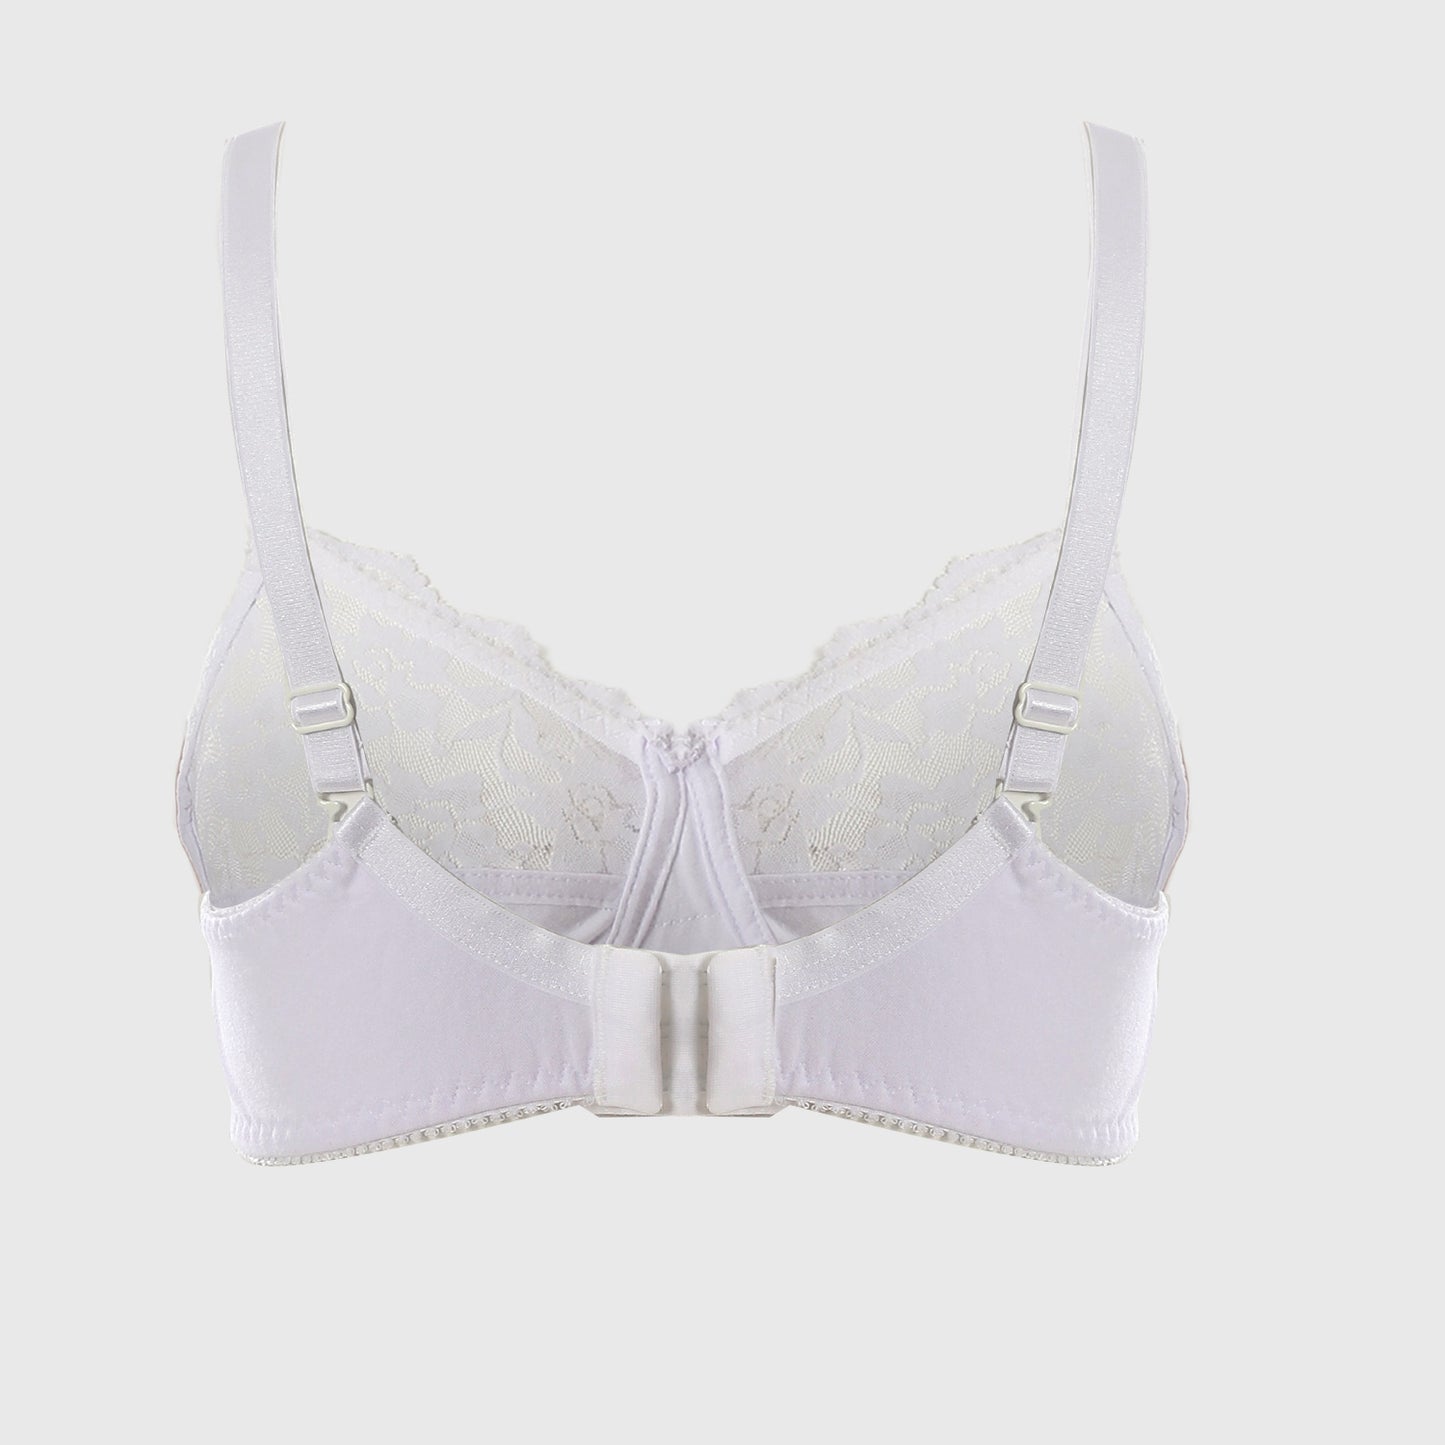 Two Halves Cup Minimizer White Lace & Synthetic Bra ميني مايزر دانتيل نورمال